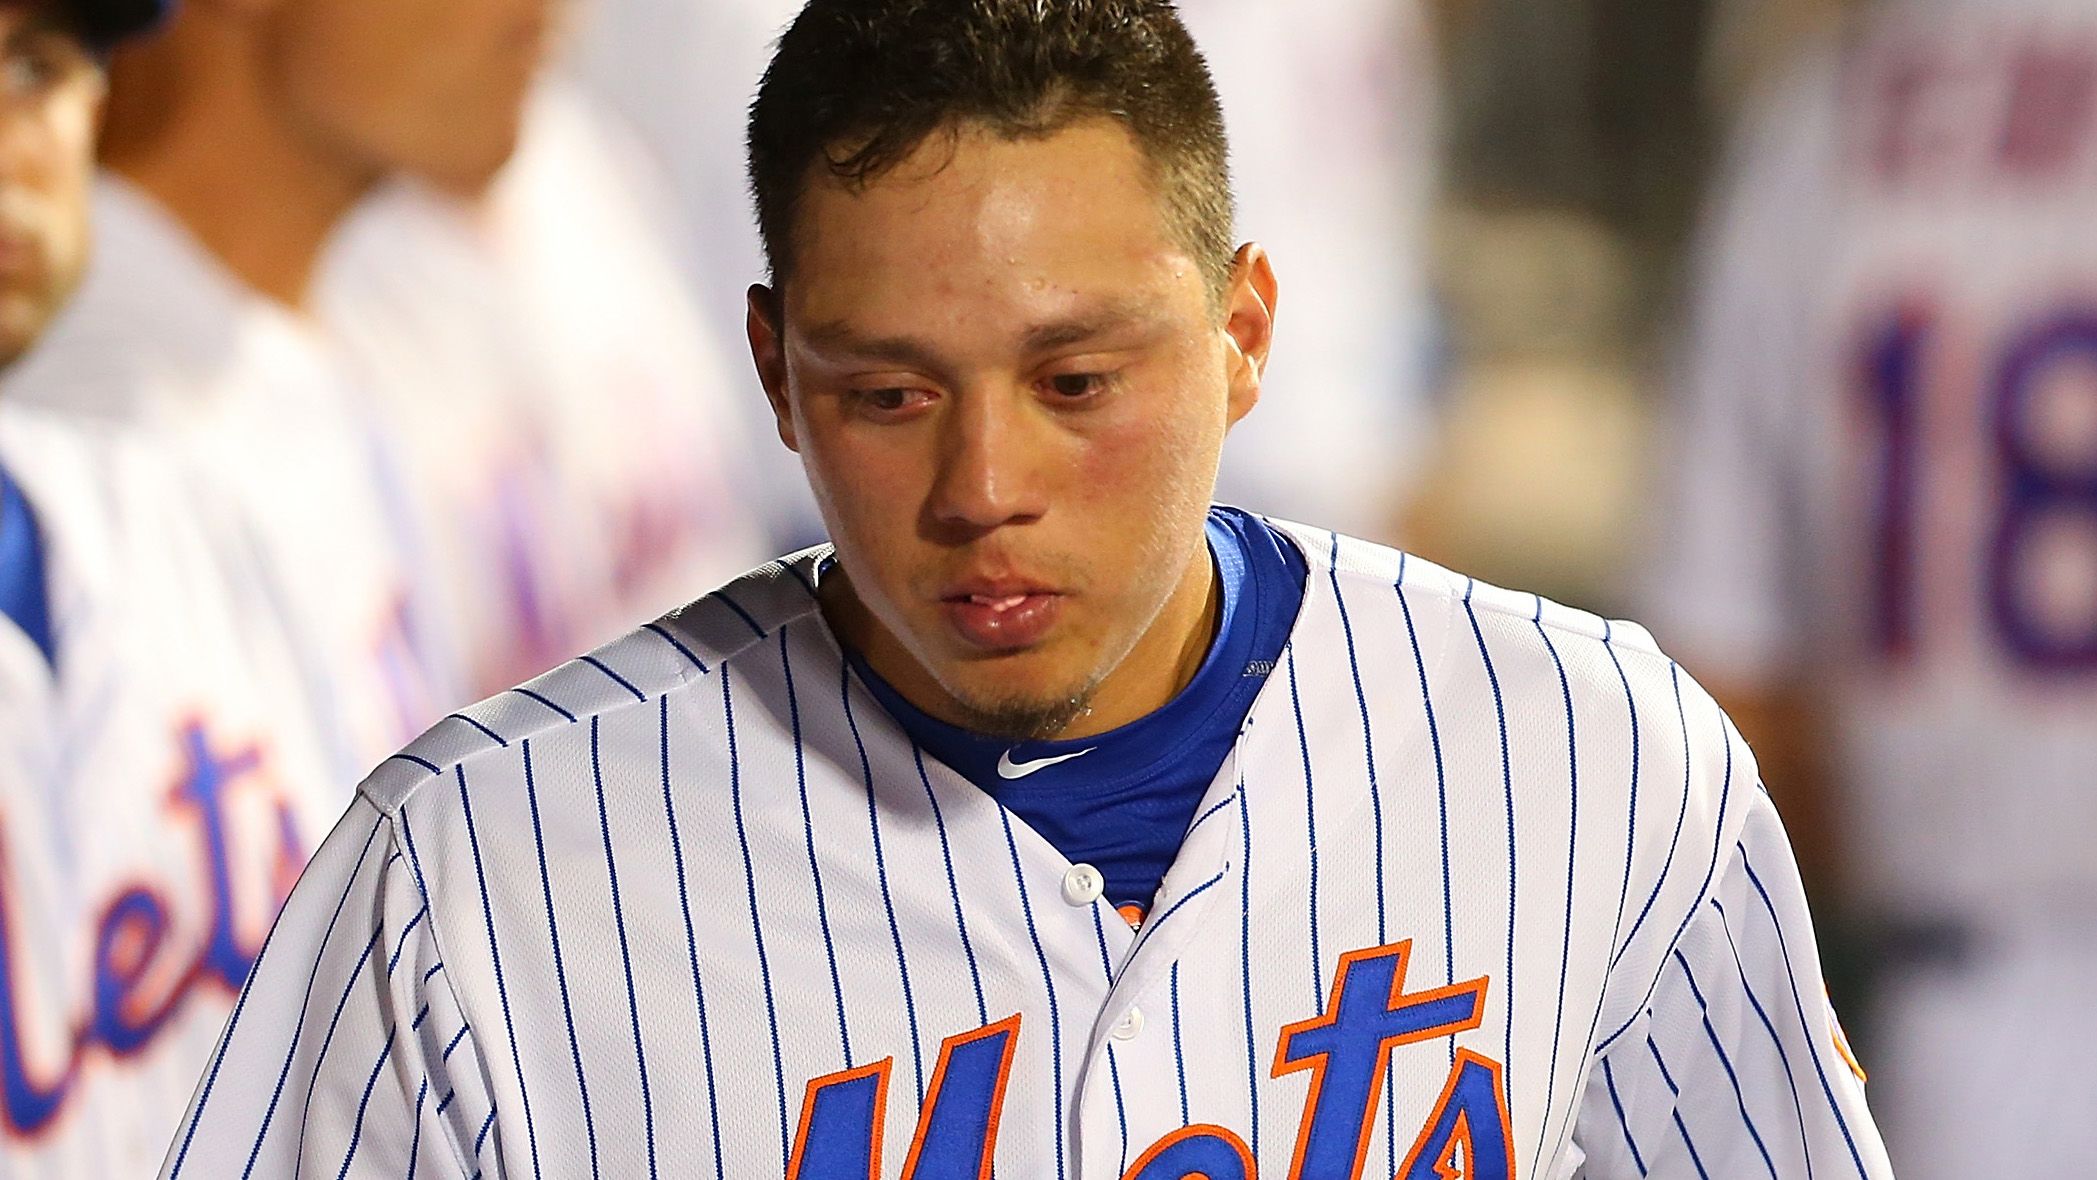 Wilmer Flores misses New York City life, still connects with Mets fans